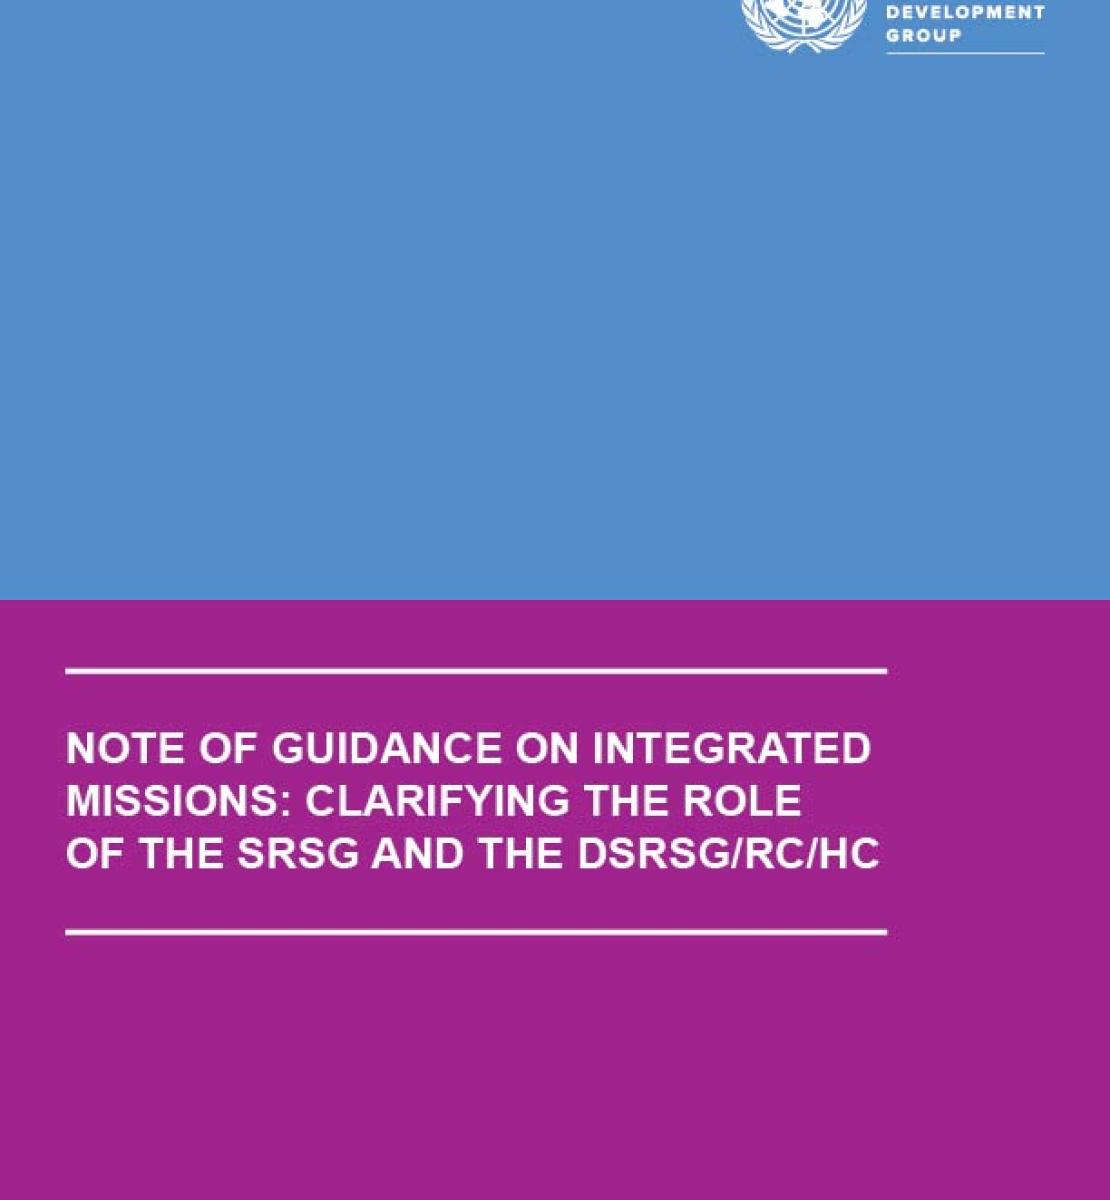 Note of Guidance on Integrated Missions: clarifying the role of the SRSG and the DSRSG/RC/HC